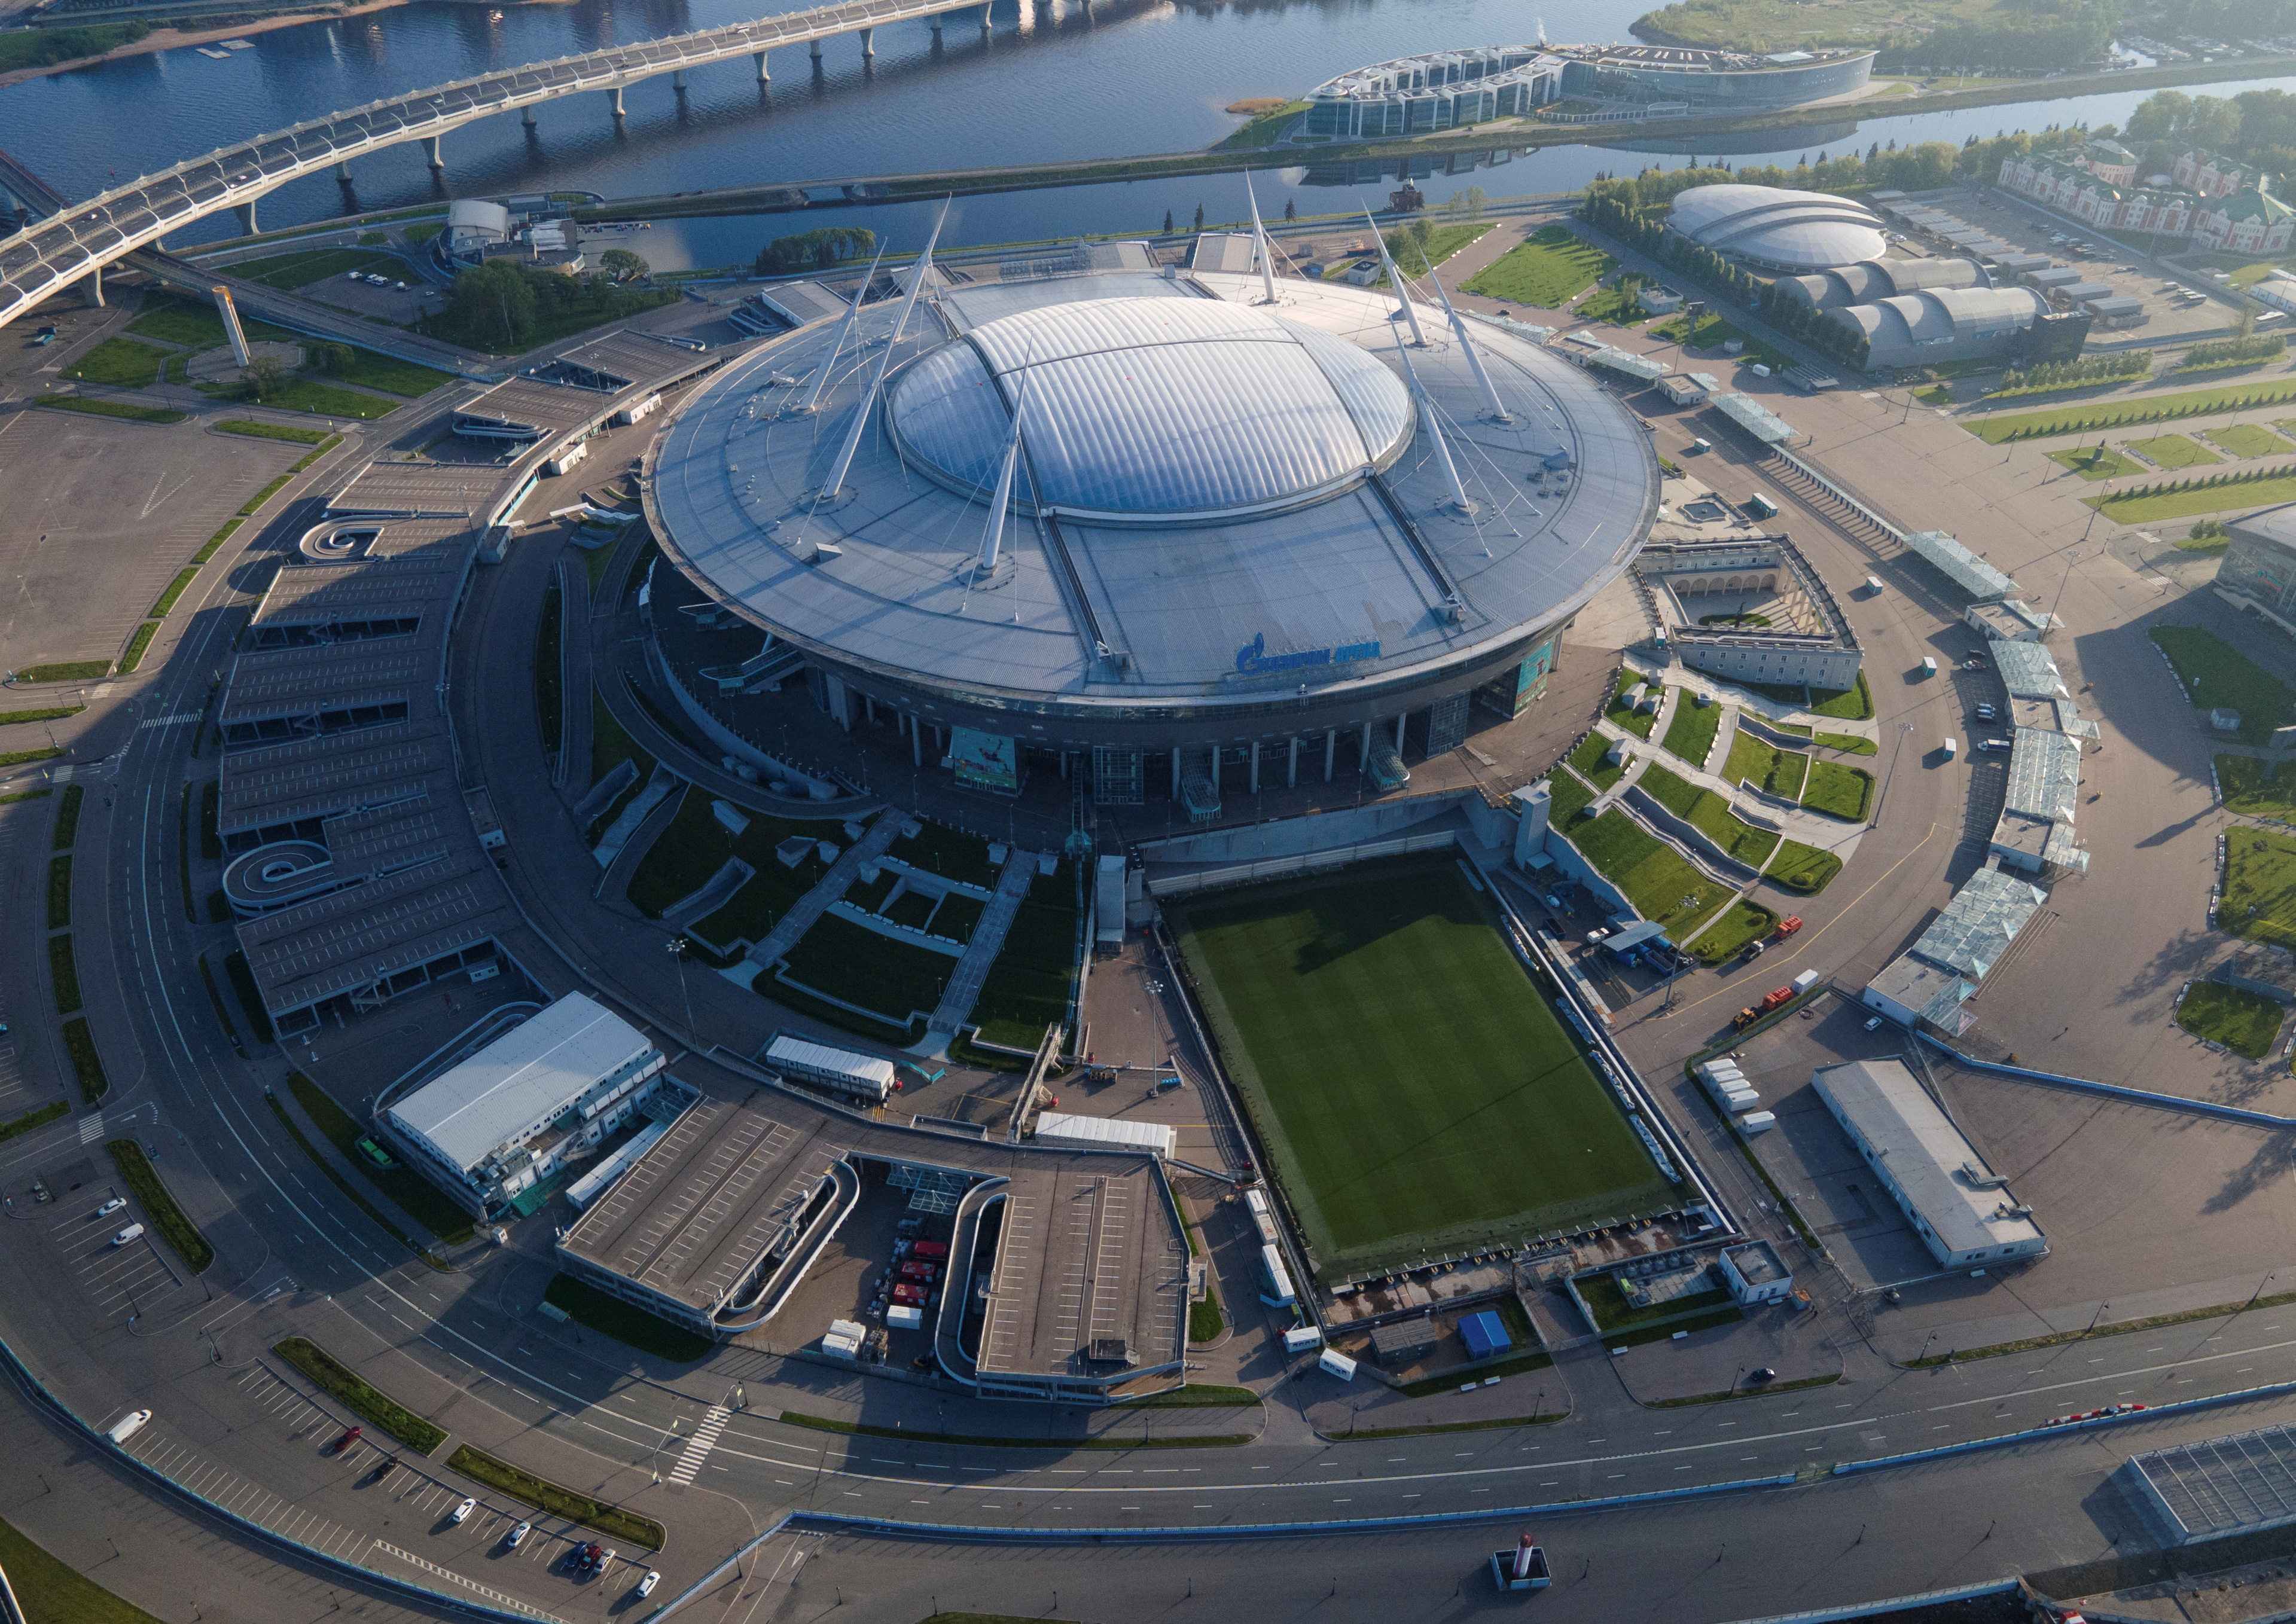 A view shows the Gazprom Arena soccer stadium in St Petersburg